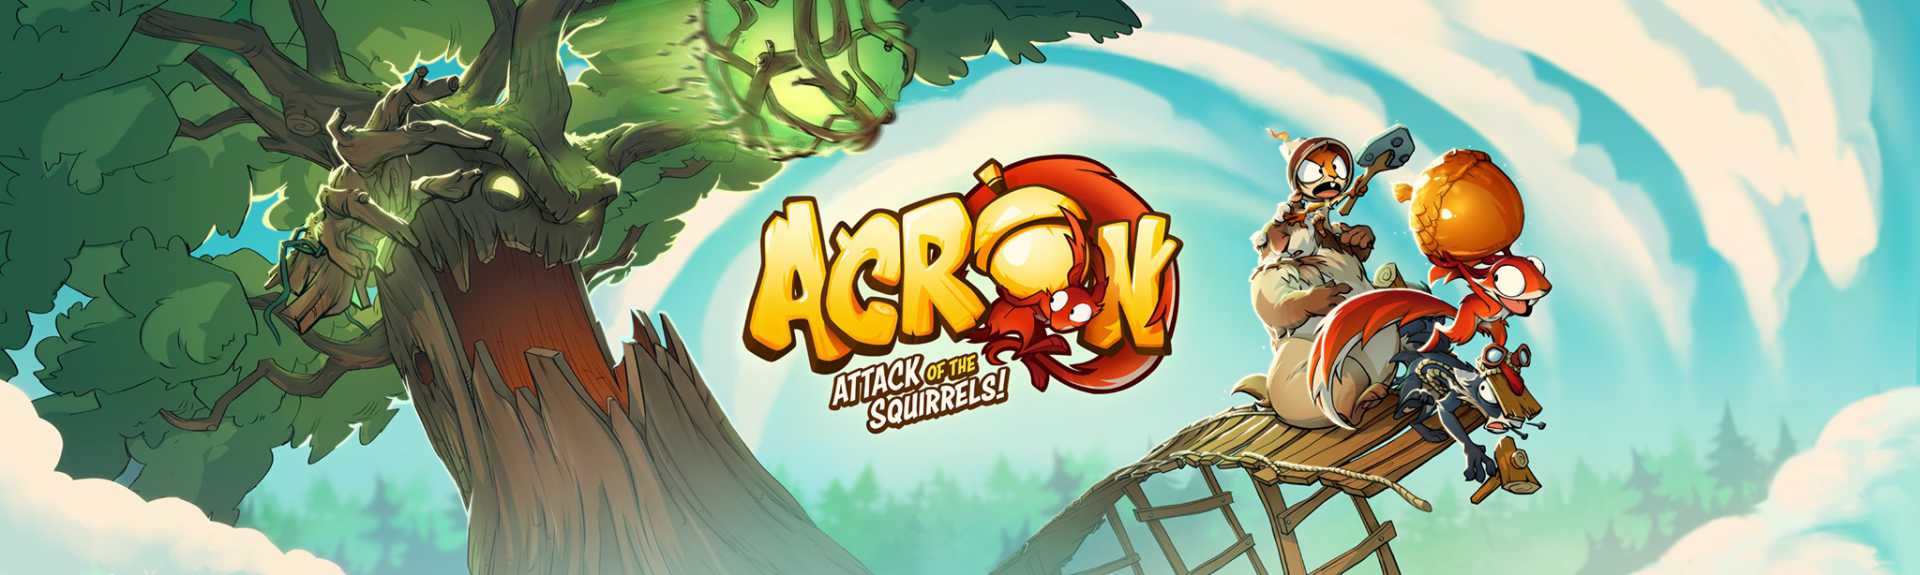 Acron: Attack of the Squirrels! - ANÁLISIS